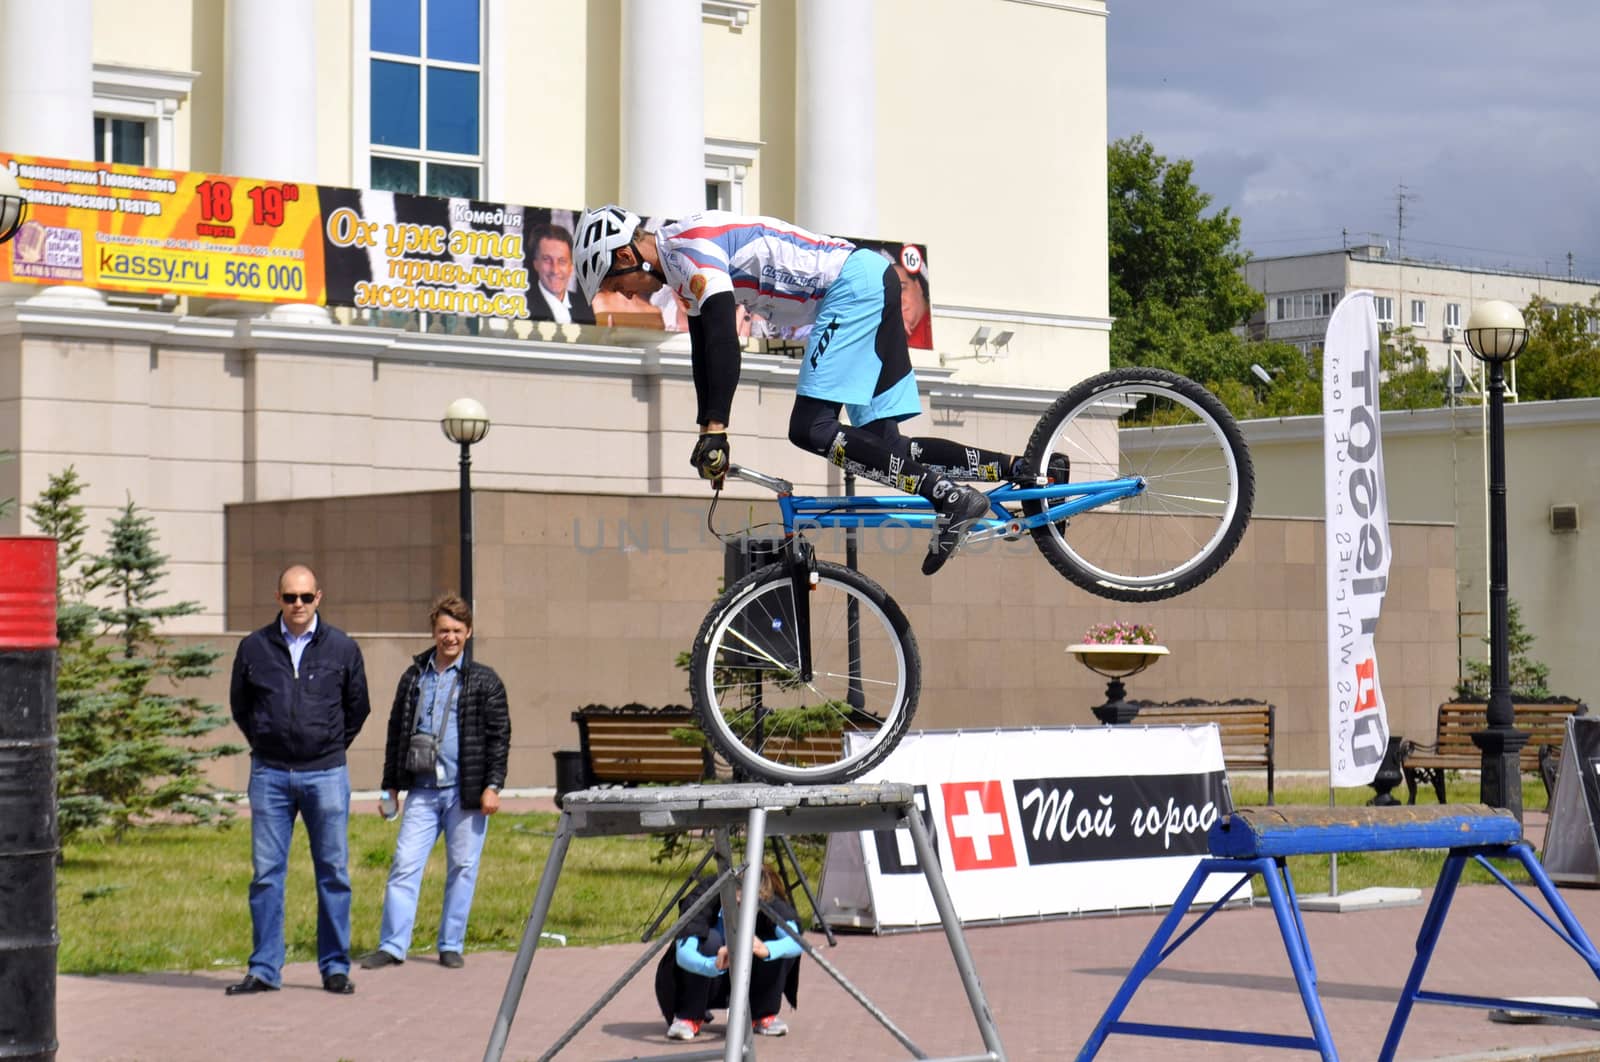 Mikhail Sukhanov performance, champions of Russia on a cycle trial. City Day of Tyumen on July 26, 2014 by veronka72